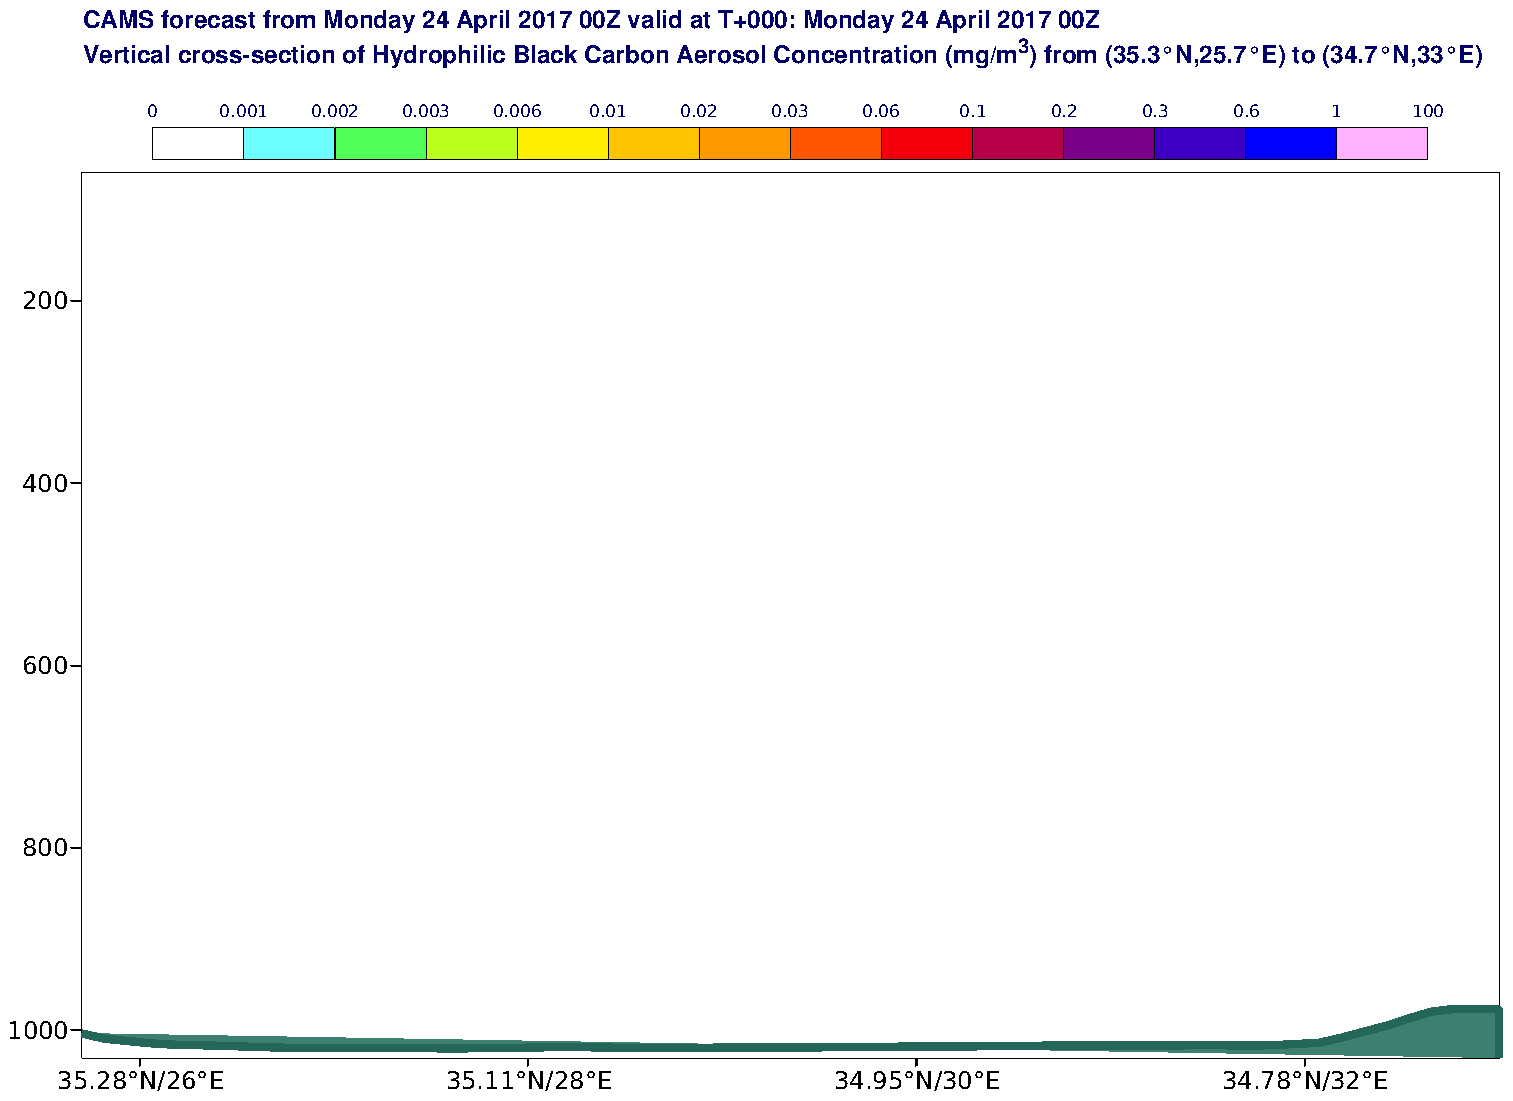 Vertical cross-section of Hydrophilic Black Carbon Aerosol Concentration (mg/m3) valid at T0 - 2017-04-24 00:00